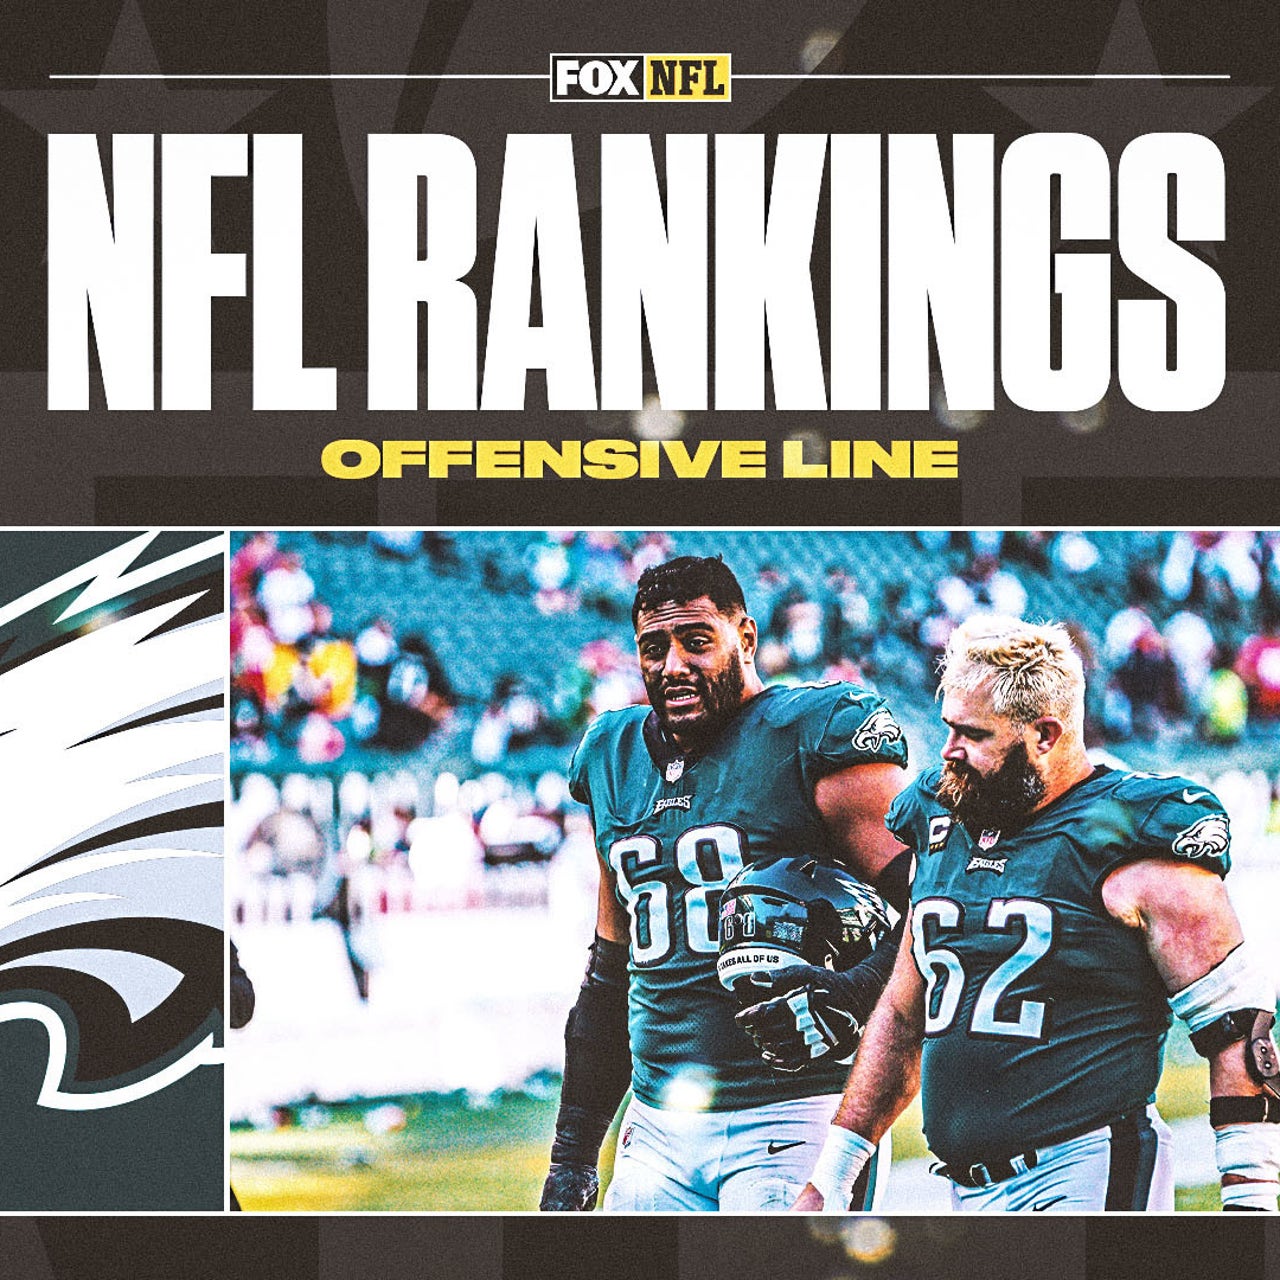 Final 2021 NFL Offensive Line Rankings, NFL News, Rankings and Statistics